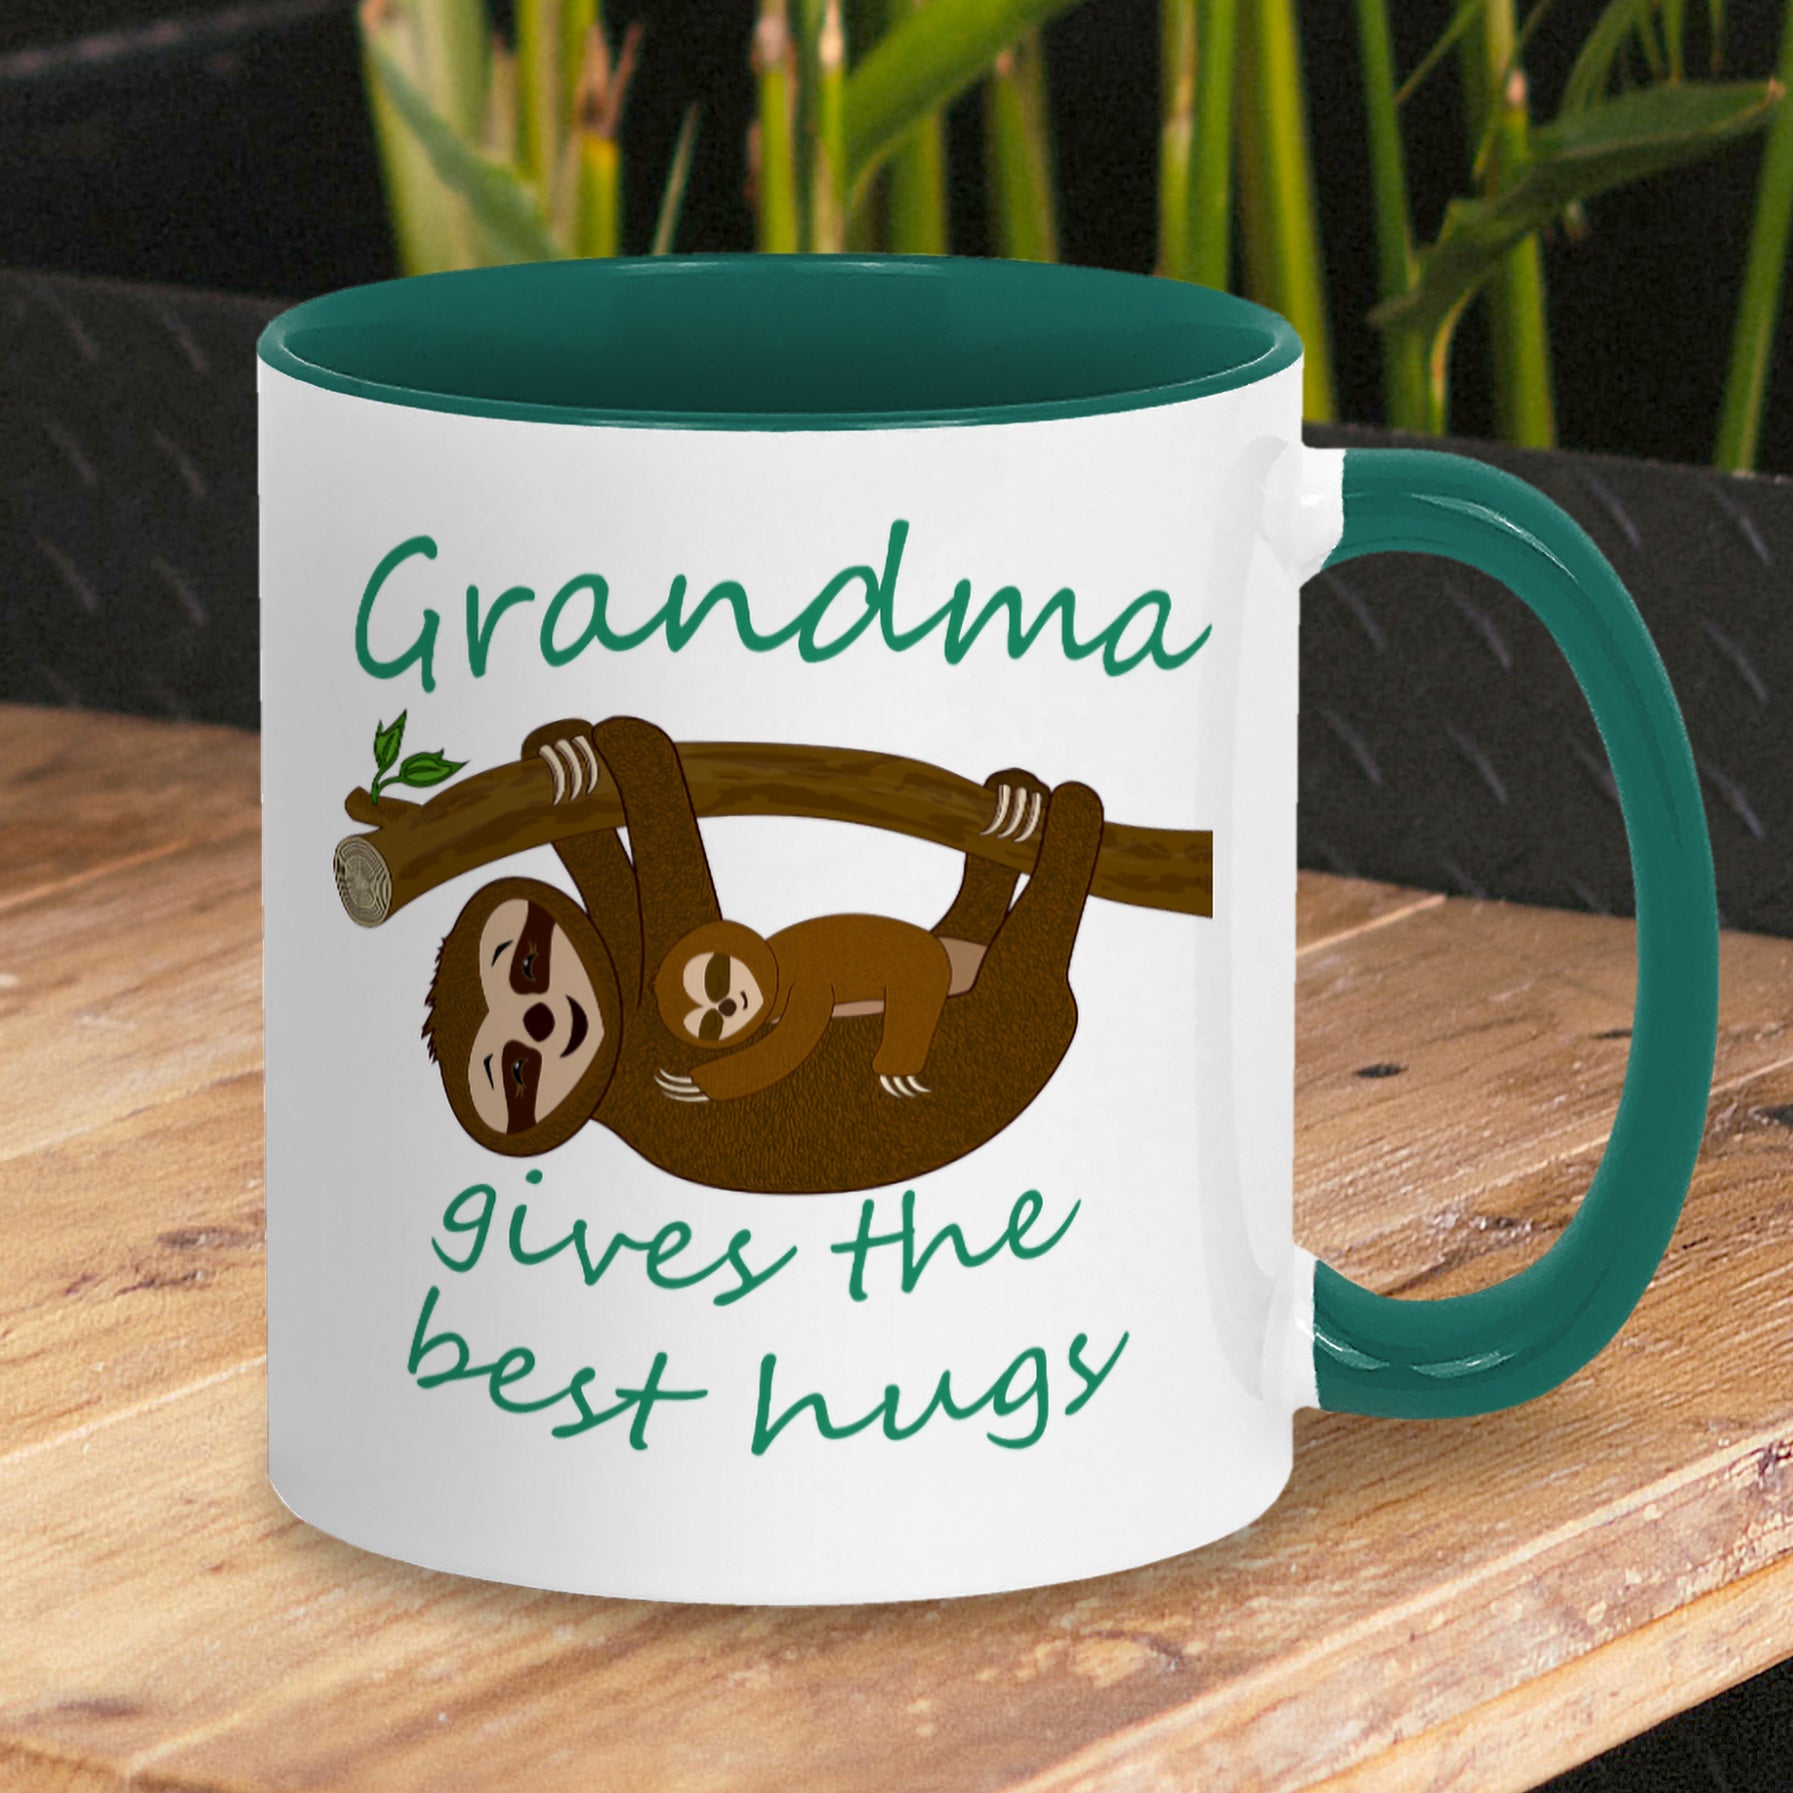 Personalised Tea / Coffee cup gift. Cute cuddly three toed sloths on a branch. Mum and baby. Two tone white with green ceramic coffee mug. Customisable name reads Grandma gives the best hugs in green font.